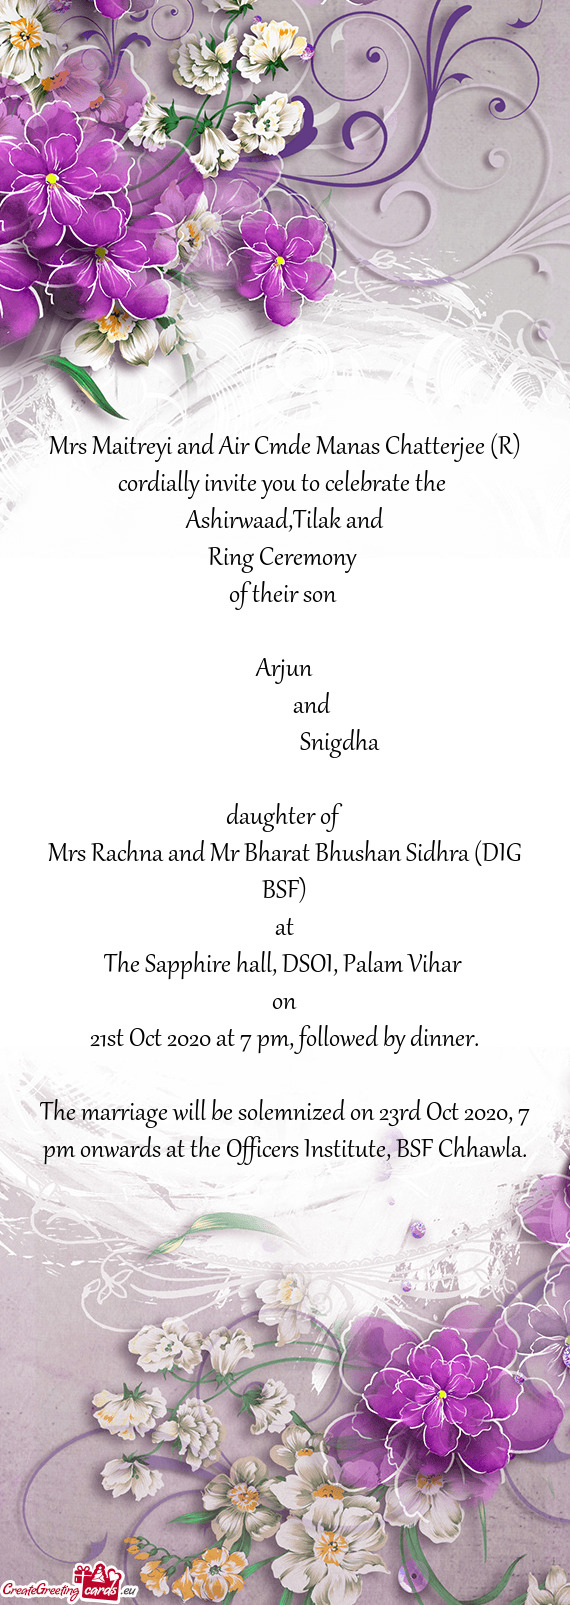 The marriage will be solemnized on 23rd Oct 2020, 7 pm onwards at the Officers Institute, BSF Chhawl